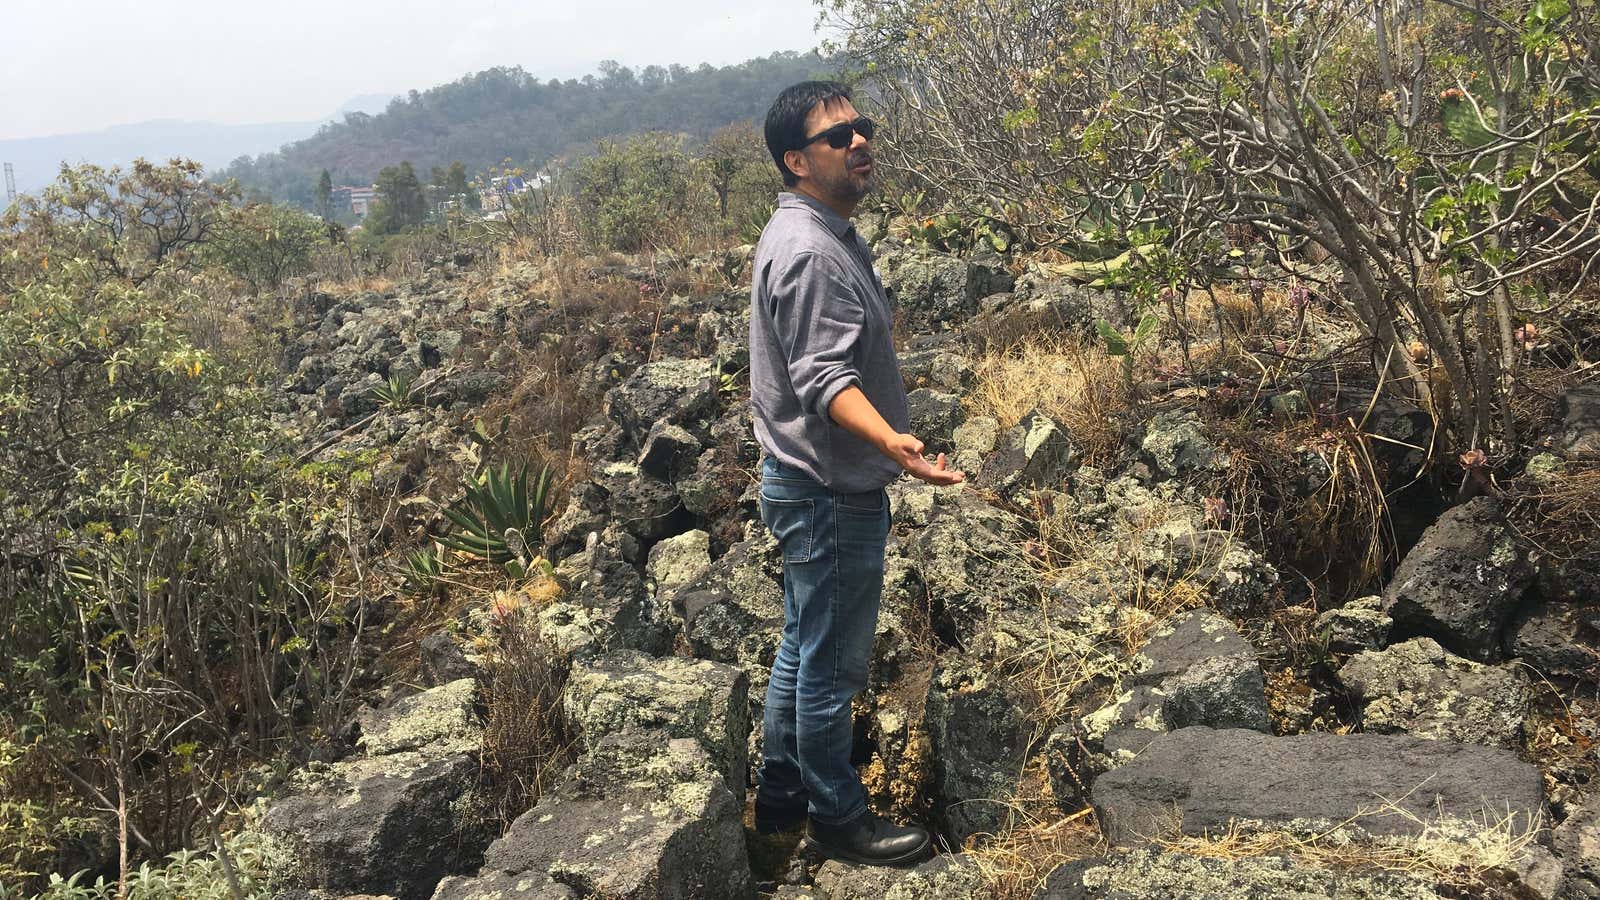 Pedro Camarena, a landscape architect, wants the city to re-expose an ancient lava flow. It could help solve the water crisis.